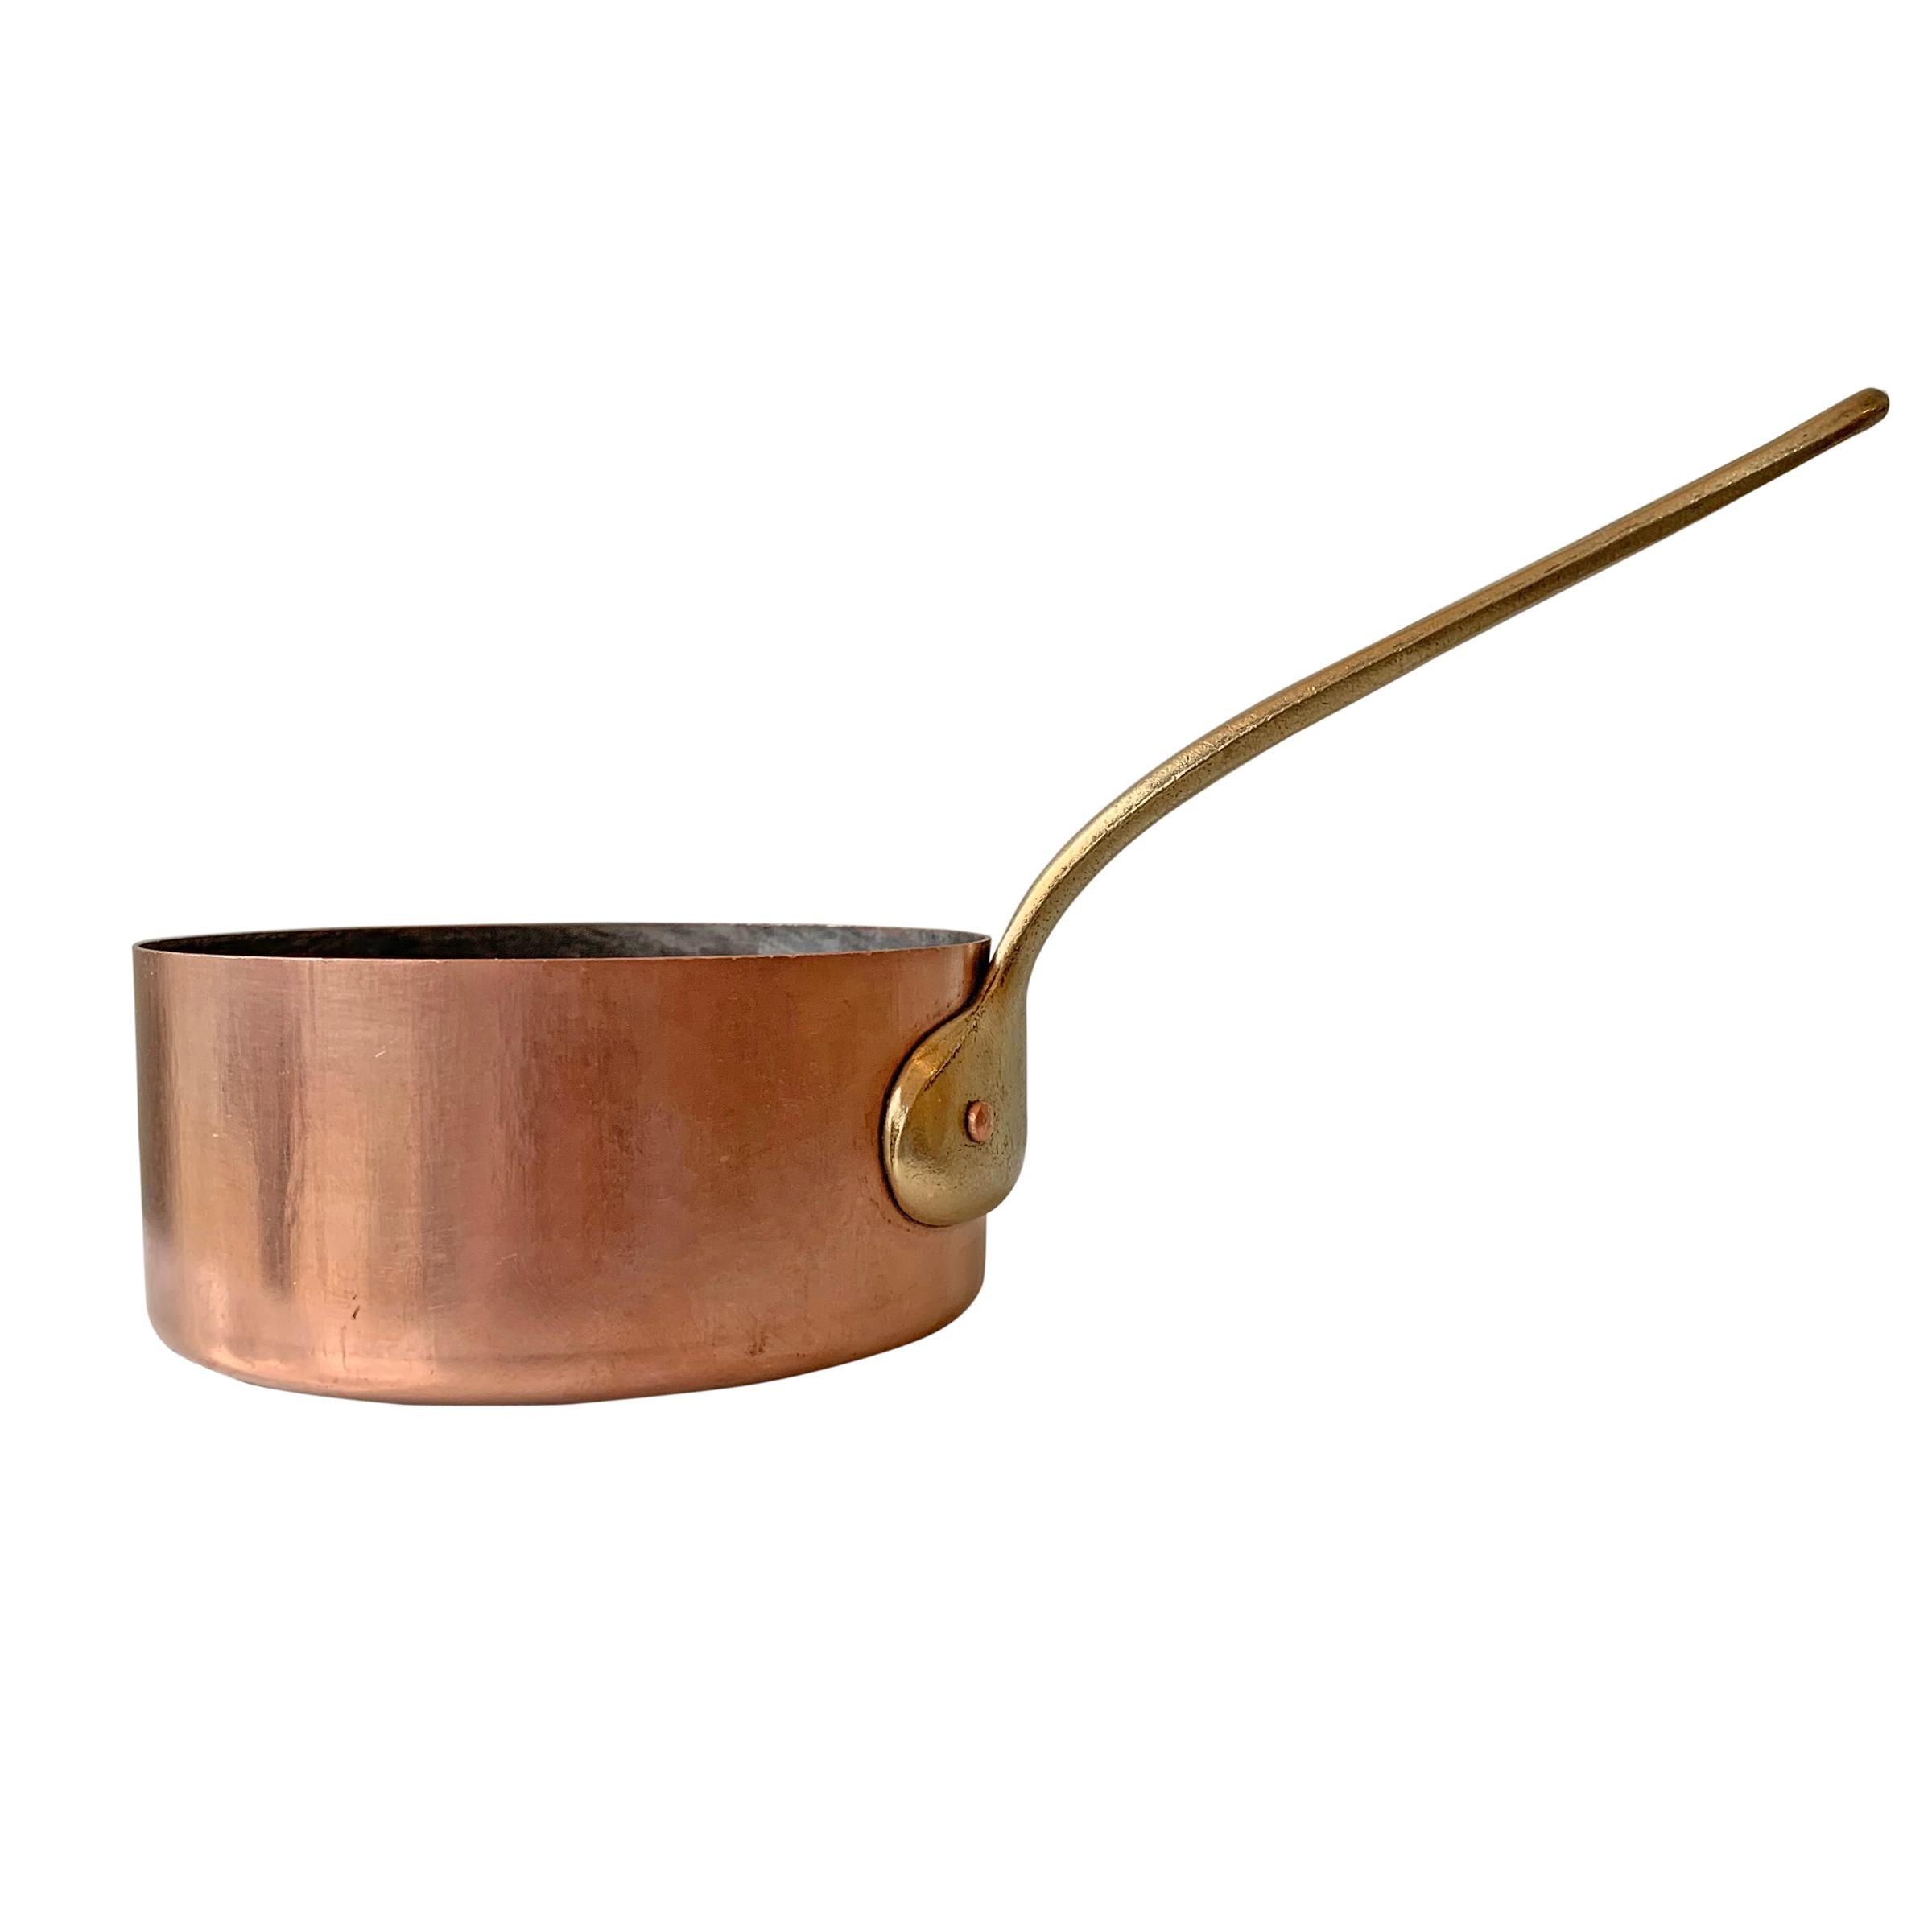 A sweet set of five early 20th century French miniature copper saucepans originally used to melt butter or keep sauces warm. Retaining their original tin linings, but we could have them retined for an additional charge.